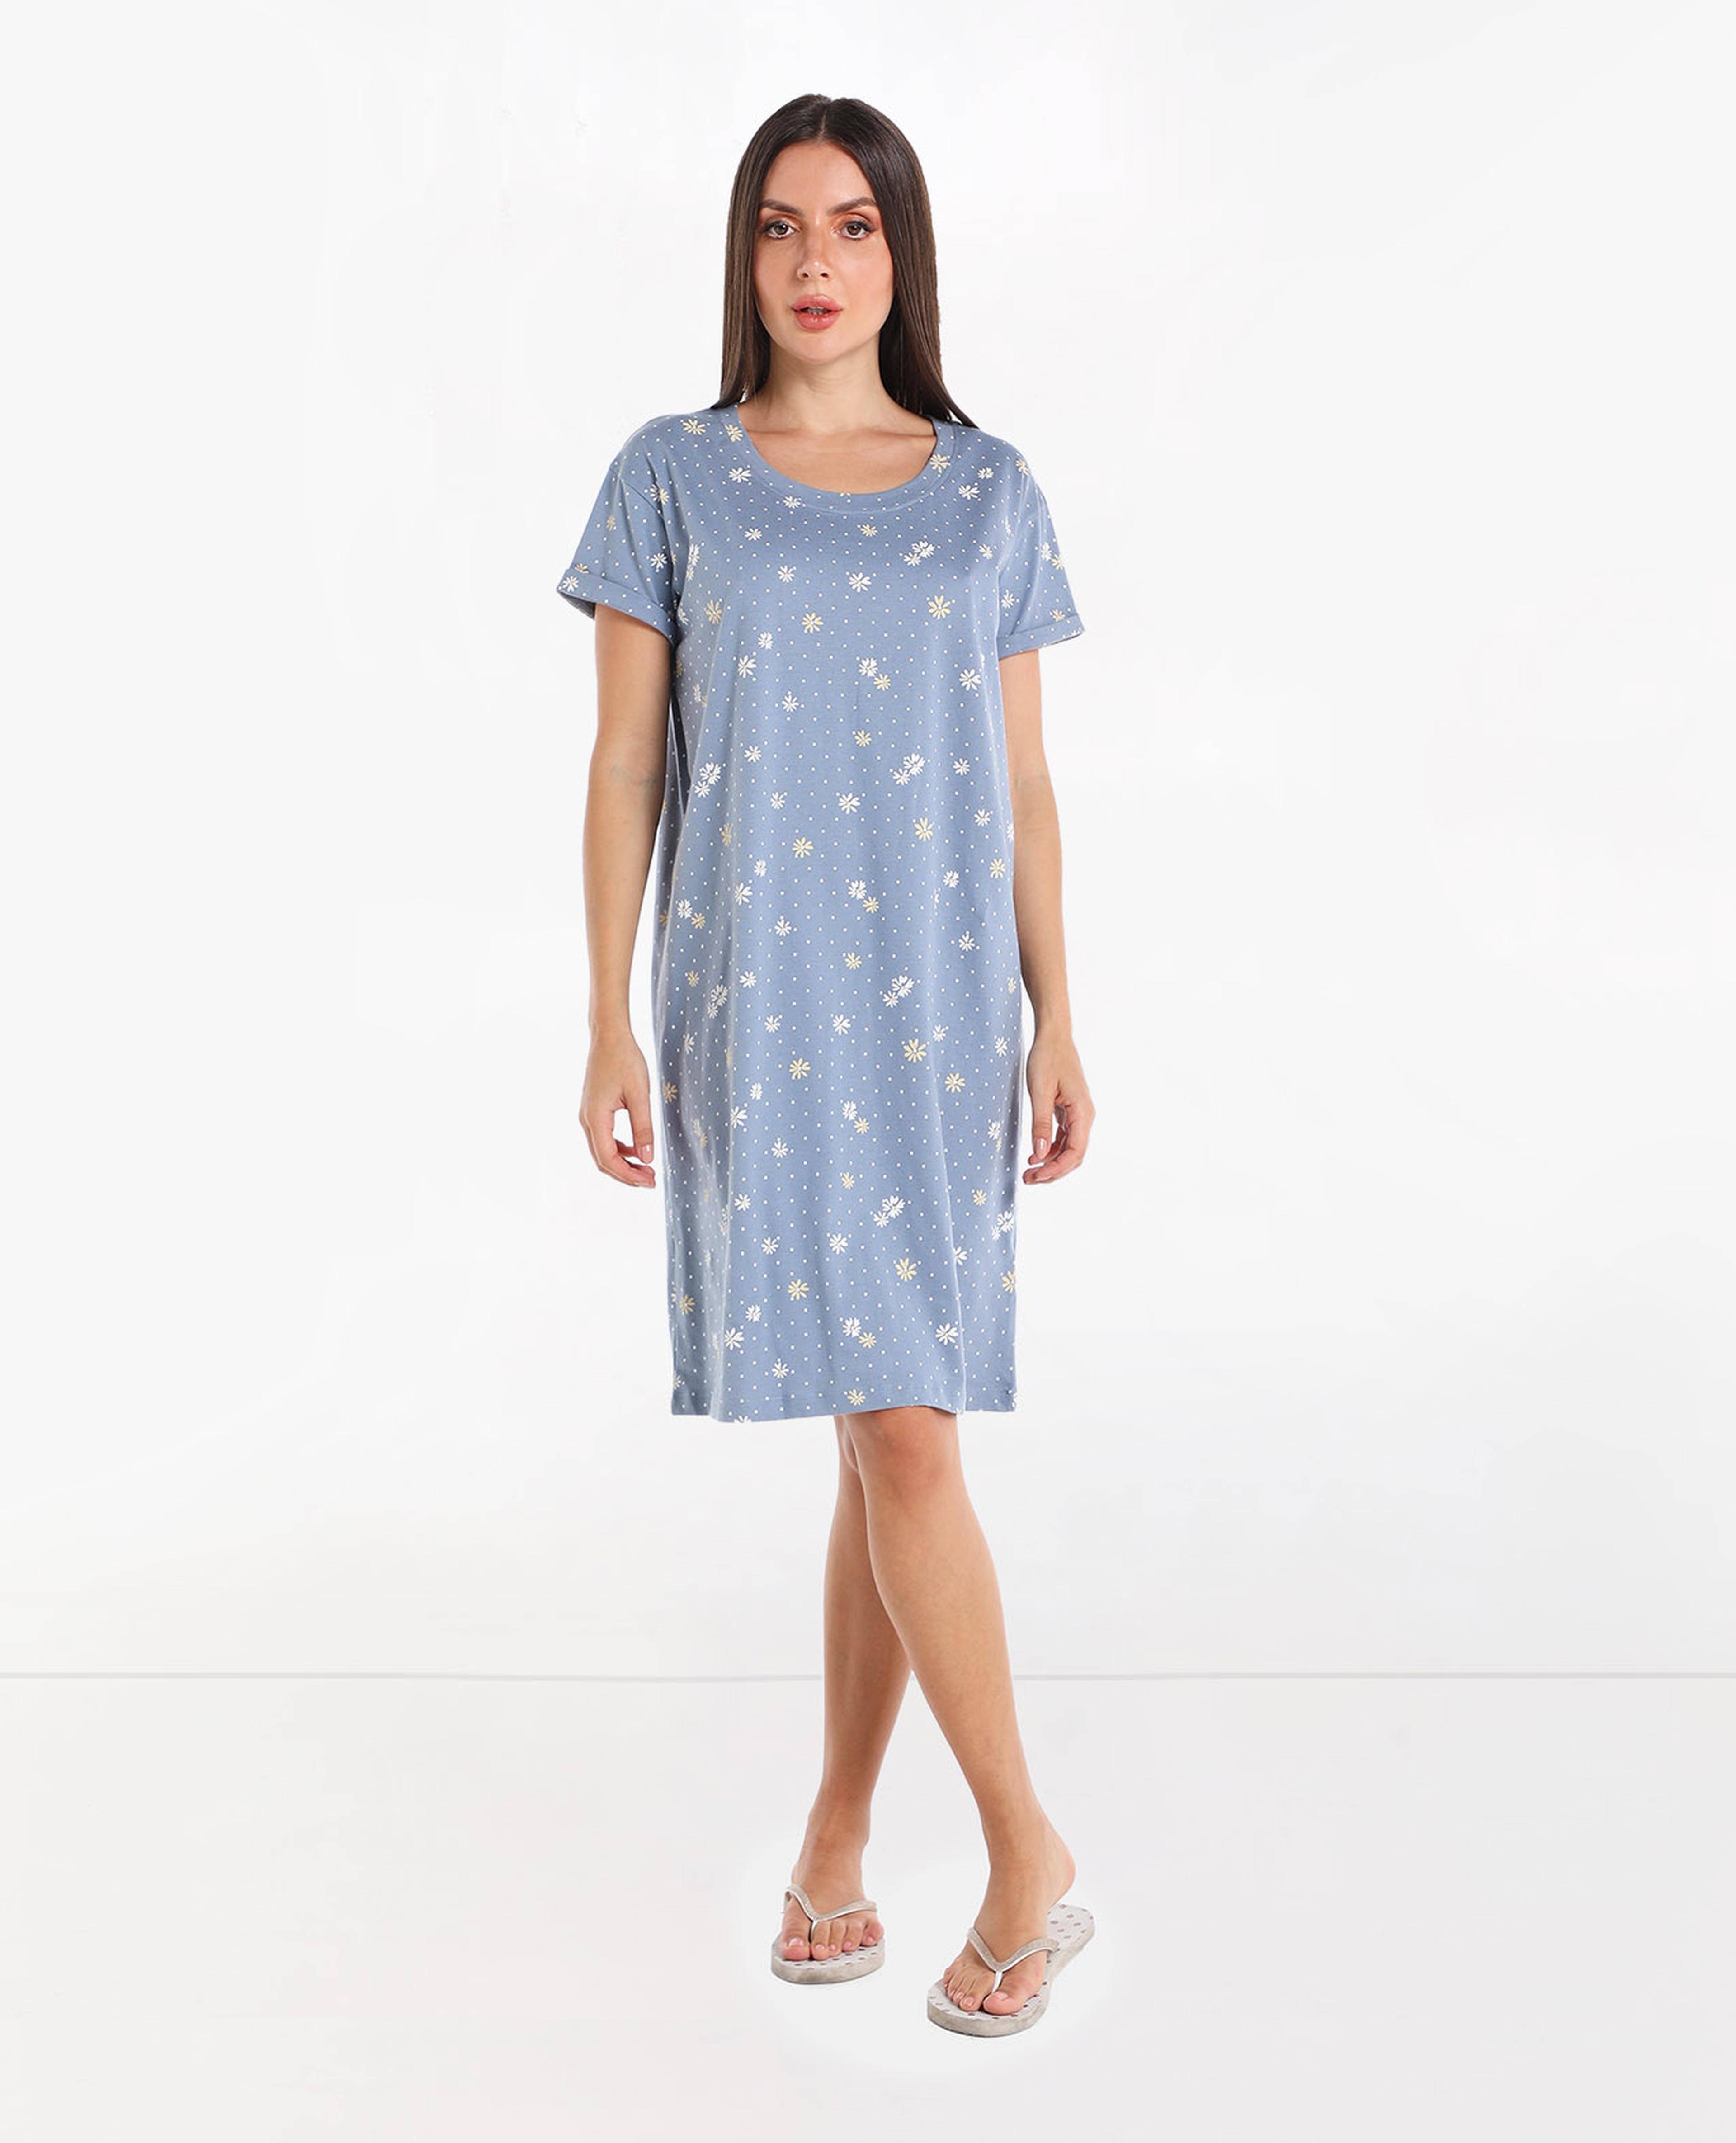 Printed T-Shirt Night Dress with Short Sleeves